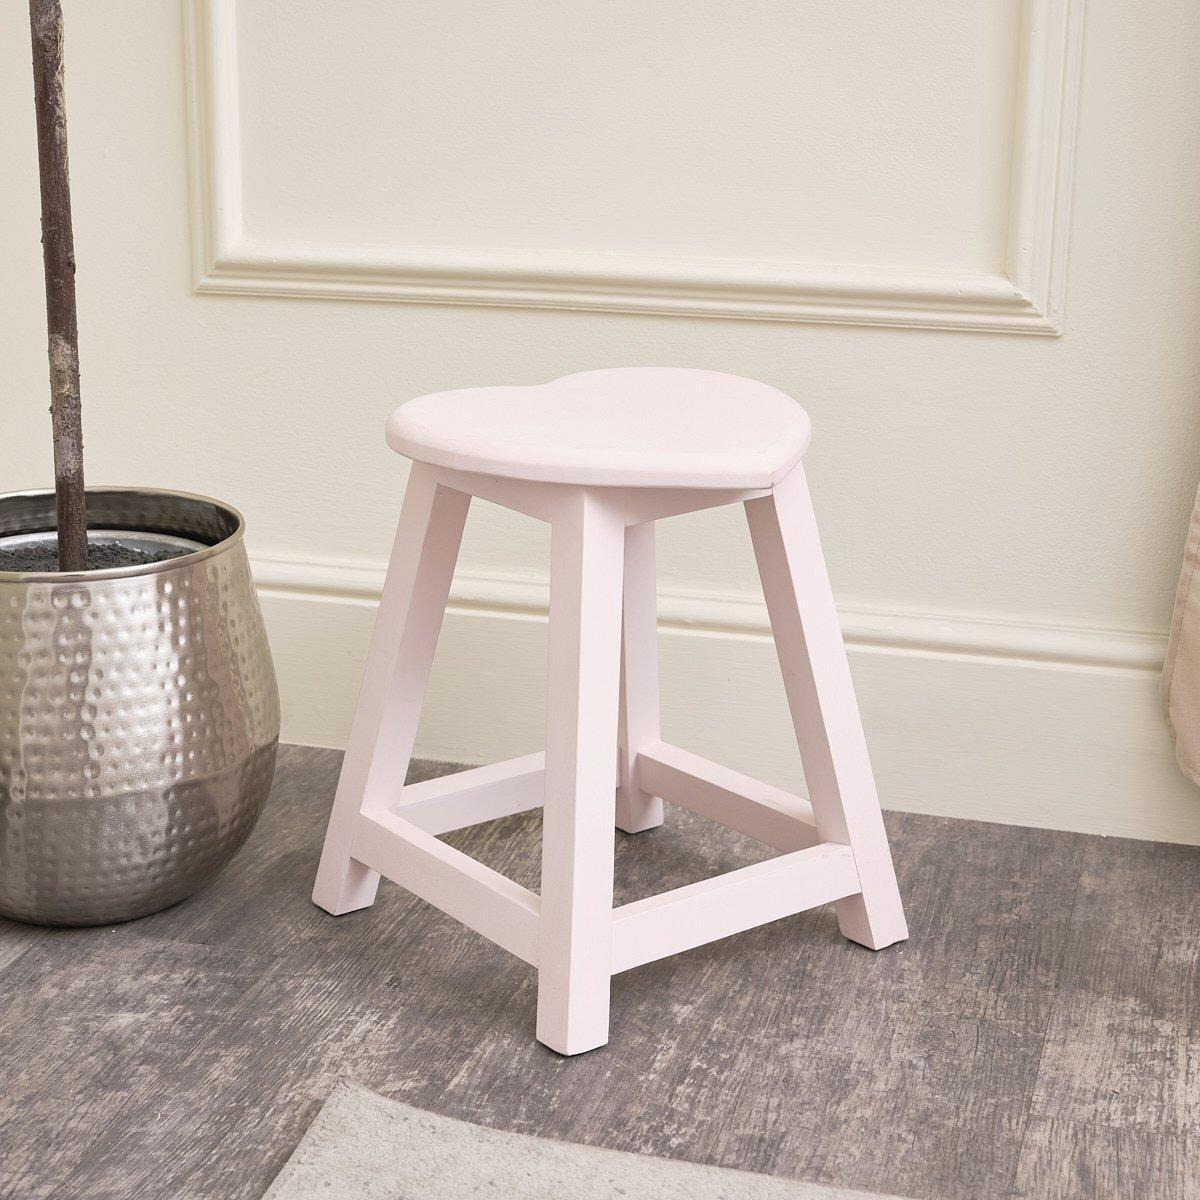 Pink Wooden Heart Stool - image 1